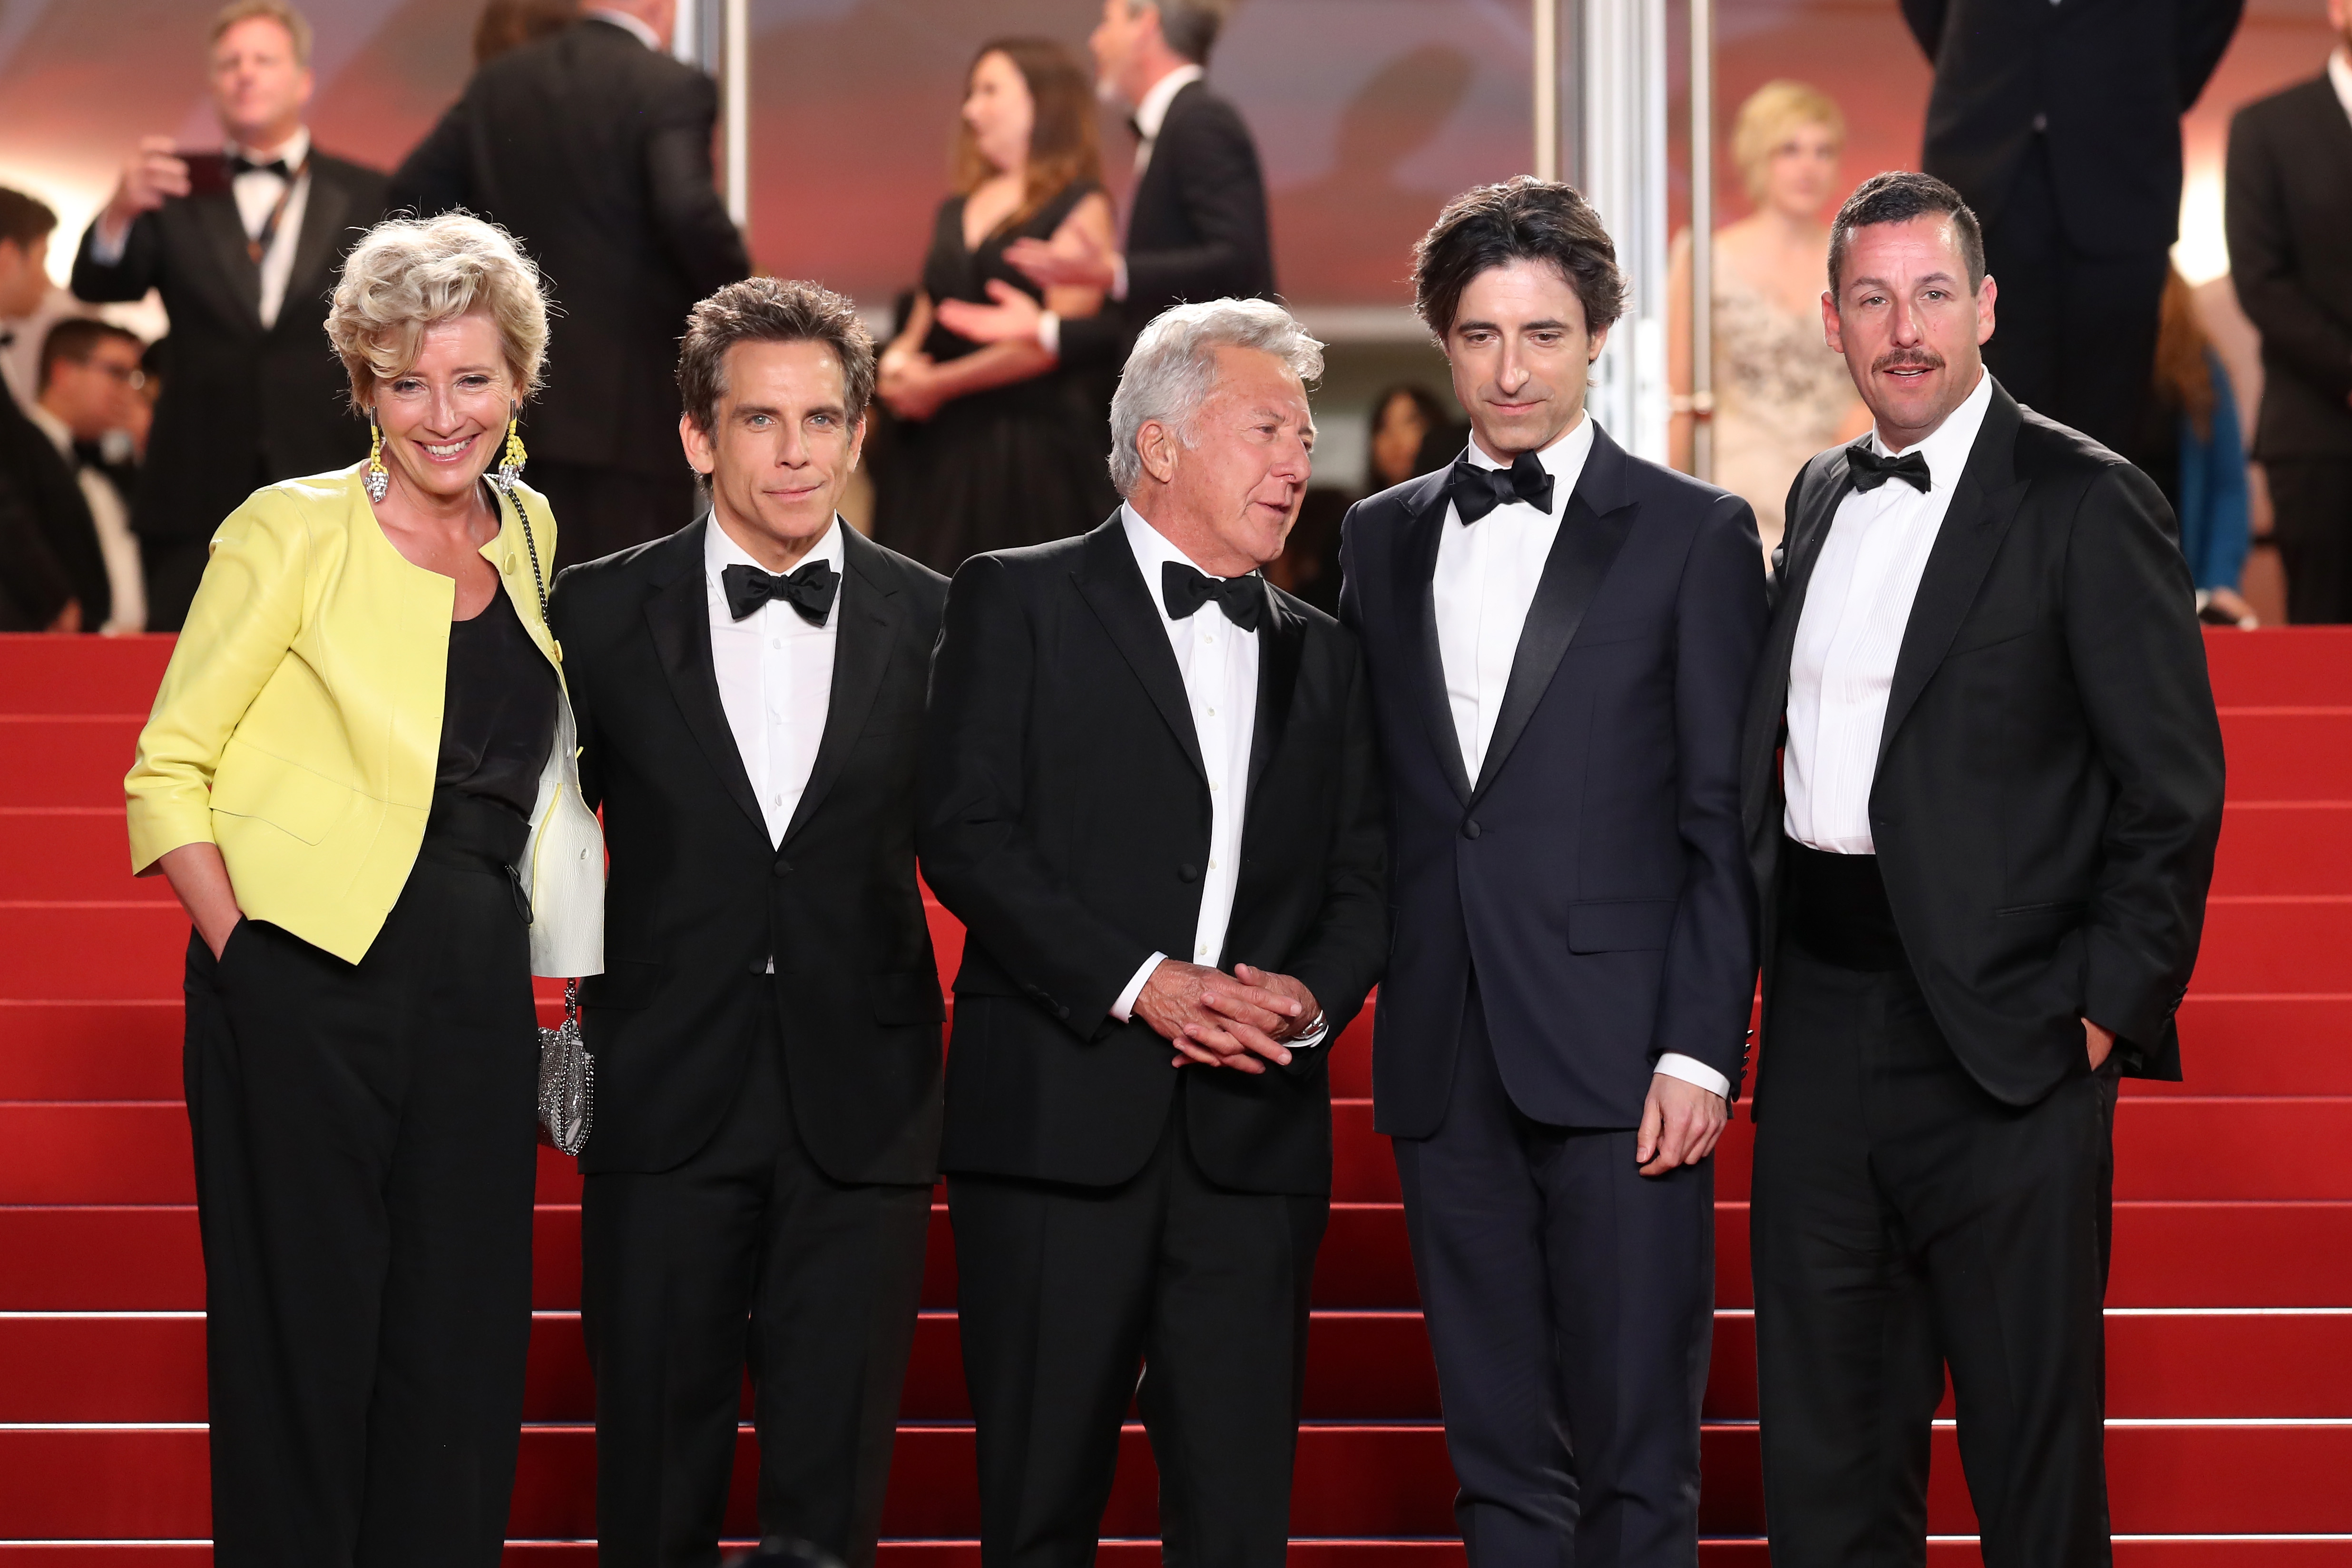 Emma Thompson, Ben Stiller, Dustin Hoffman, Noah Baumbach and Adam Sandler depart at the "The Meyerowitz Stories" screening at the Cannes Film Festival in 2017 | Source: Getty Images